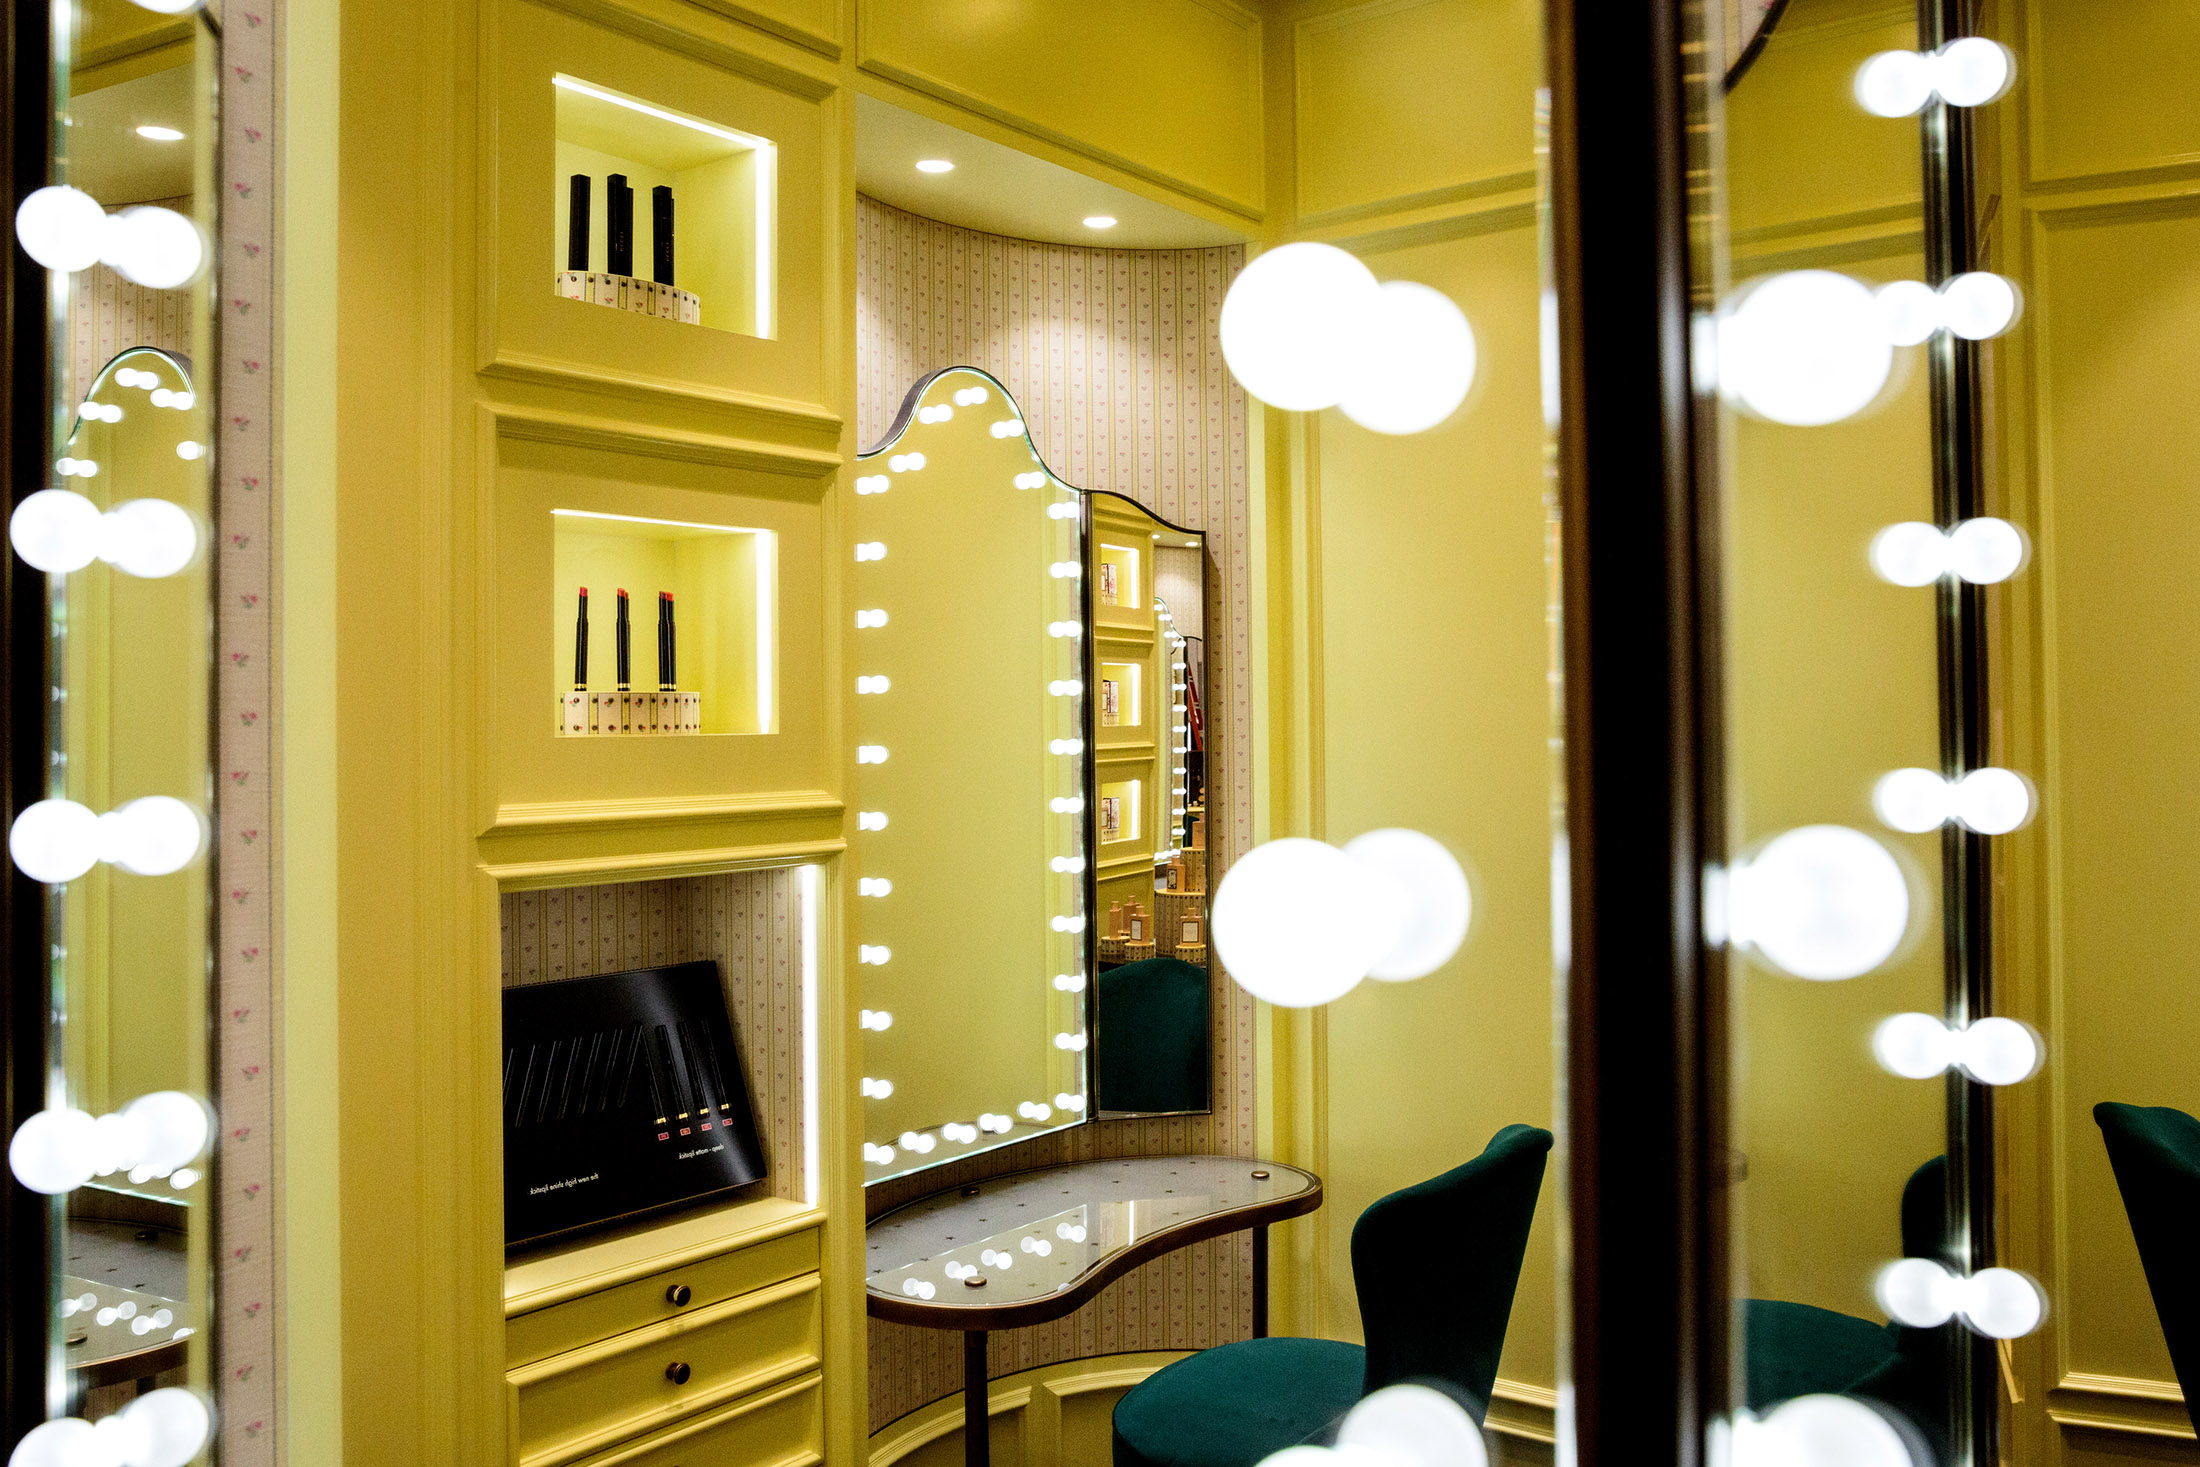 Saks Offers Facial Workouts, Threaded Brows in Cosmetics Redo